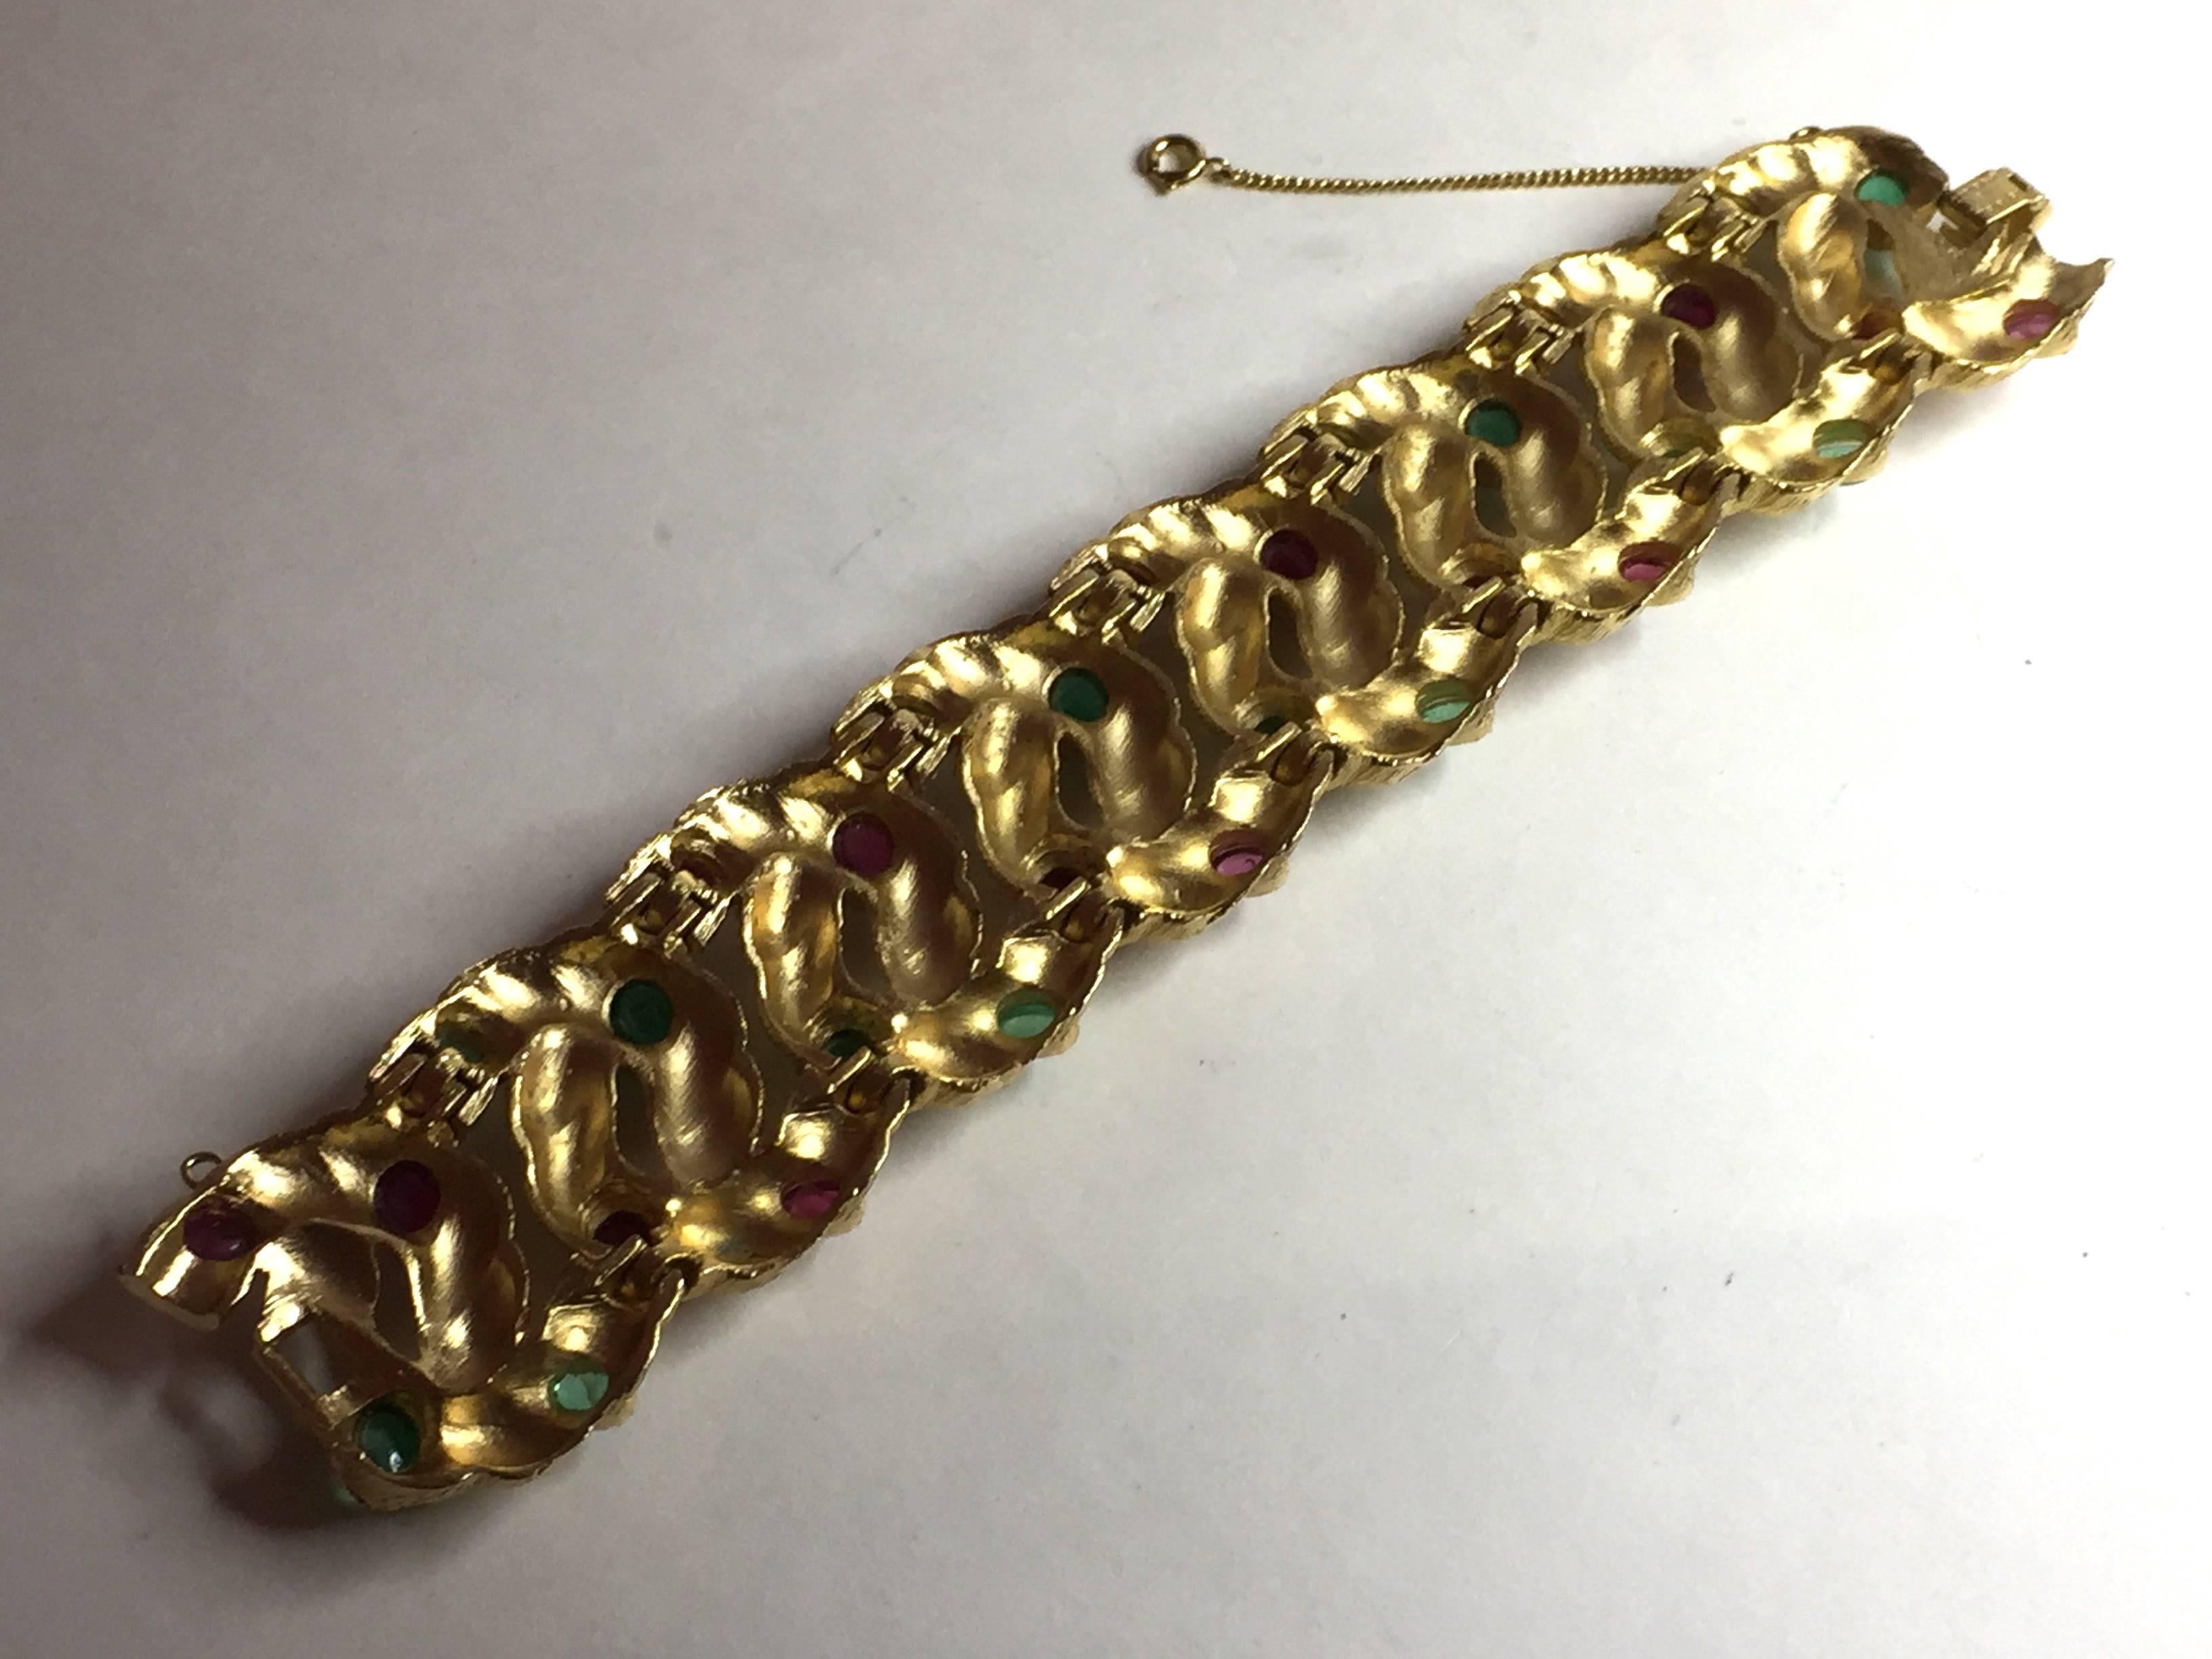 This listing is ONLY for the 1960s TRIFARI Brushed goldtone bracelet embellished with scored detail and gem tone faux ruby and emerald cabochon stonework.The bracelet is 7